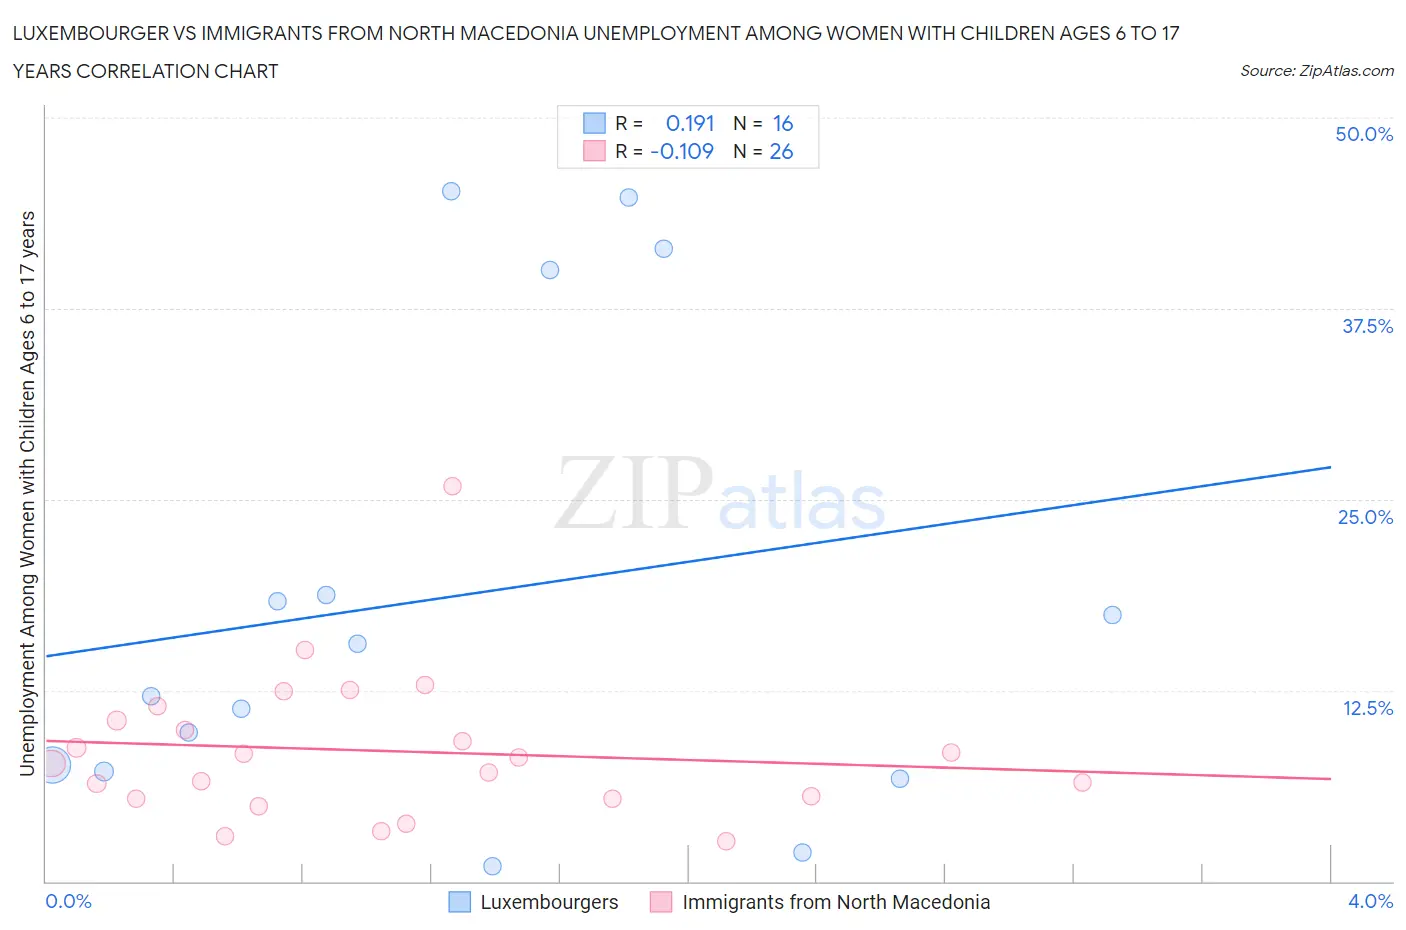 Luxembourger vs Immigrants from North Macedonia Unemployment Among Women with Children Ages 6 to 17 years